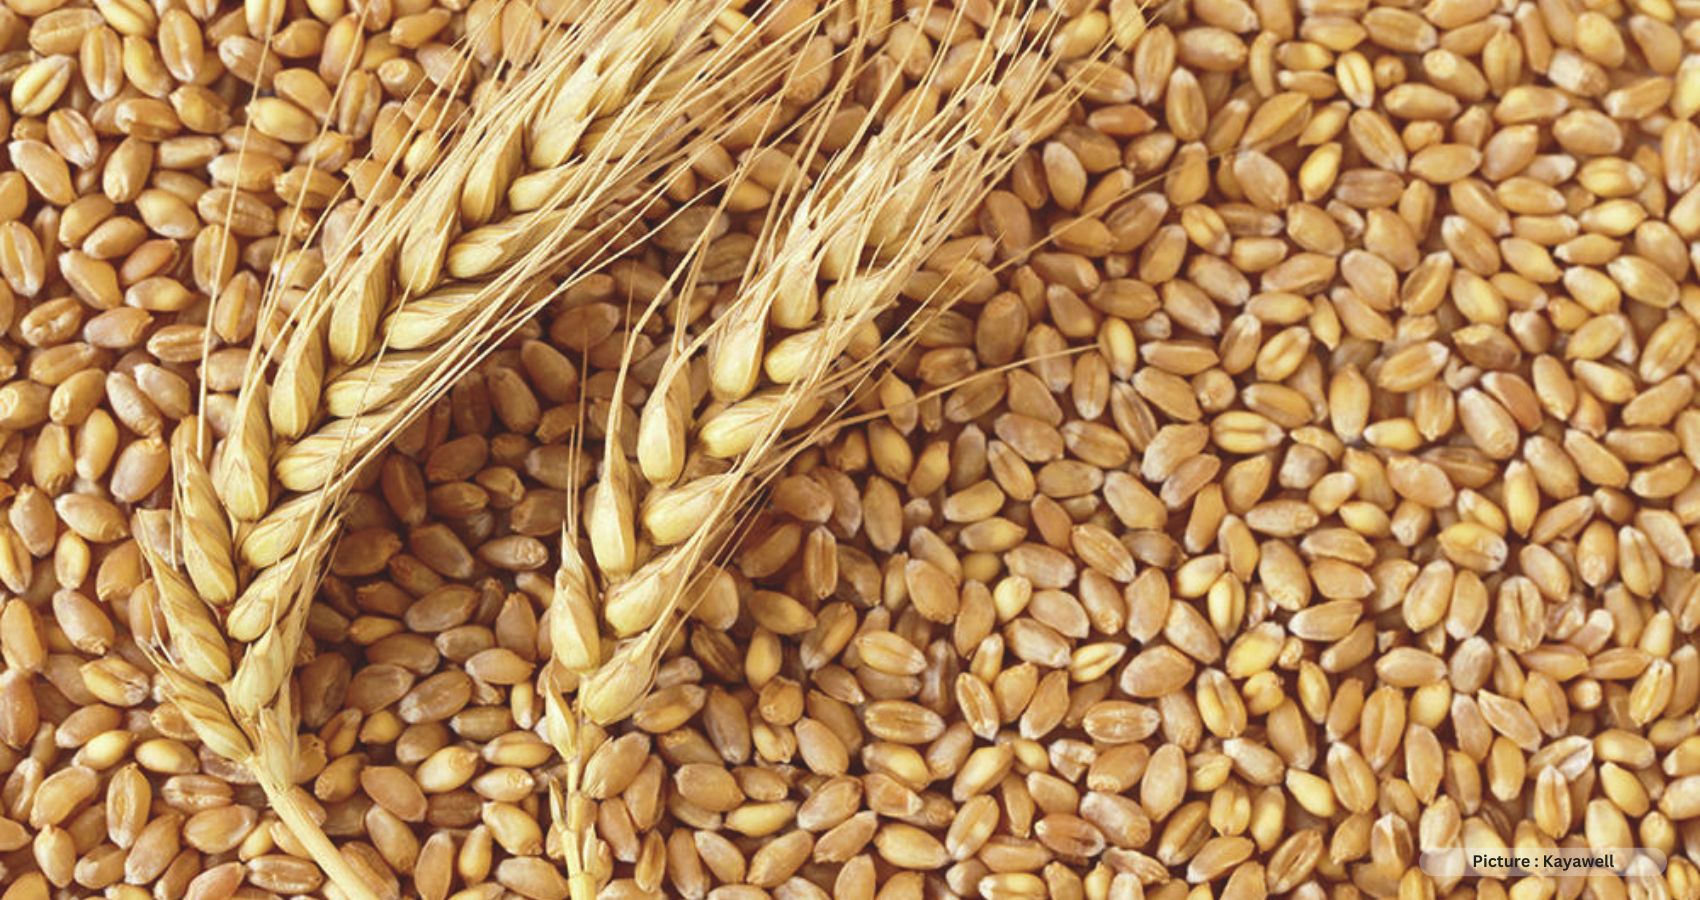 A New Variety of Wheat To Keep Diabetes, Obesity In Check